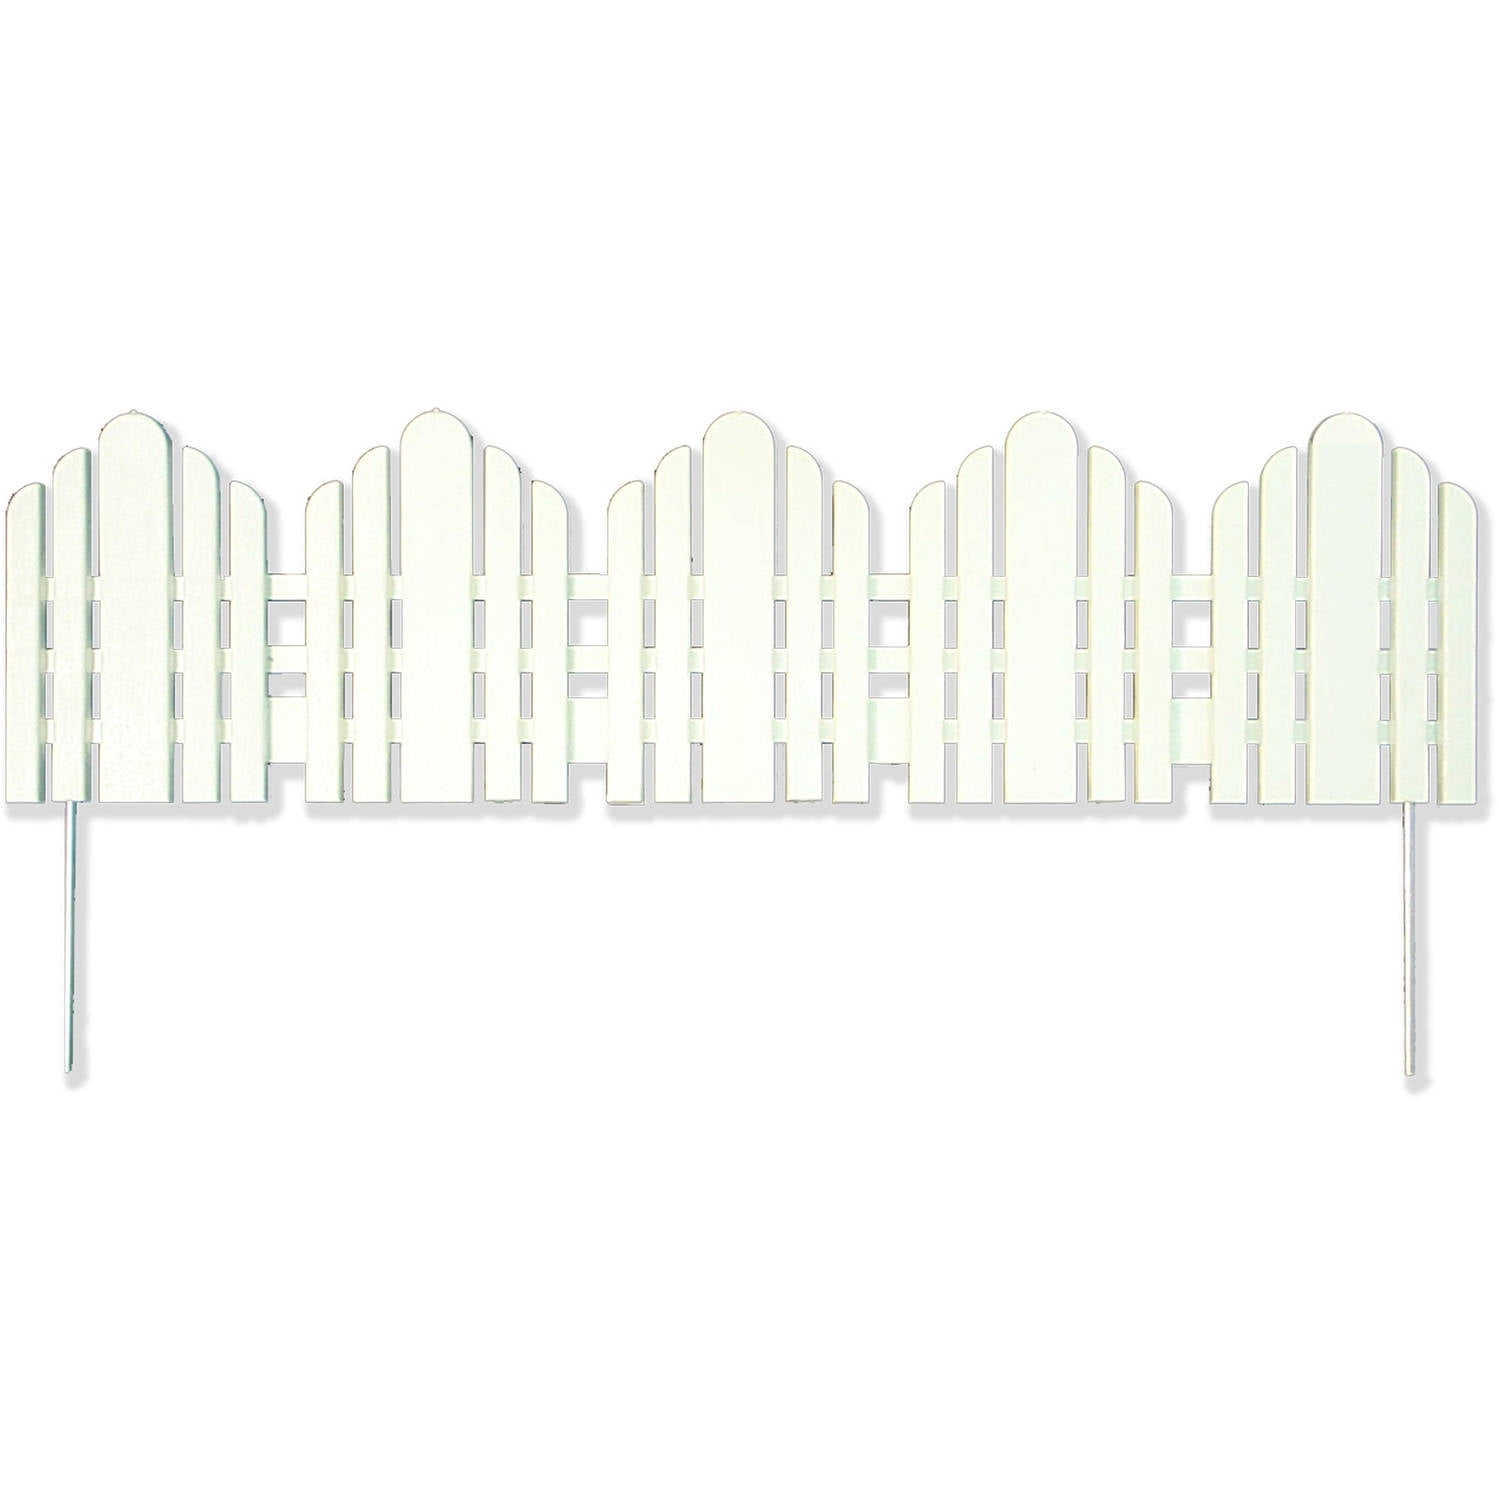 Collections Etc Butterfly Picket Fence Garden Border Seasonal Decorative Outdoor Accent Set of 4 